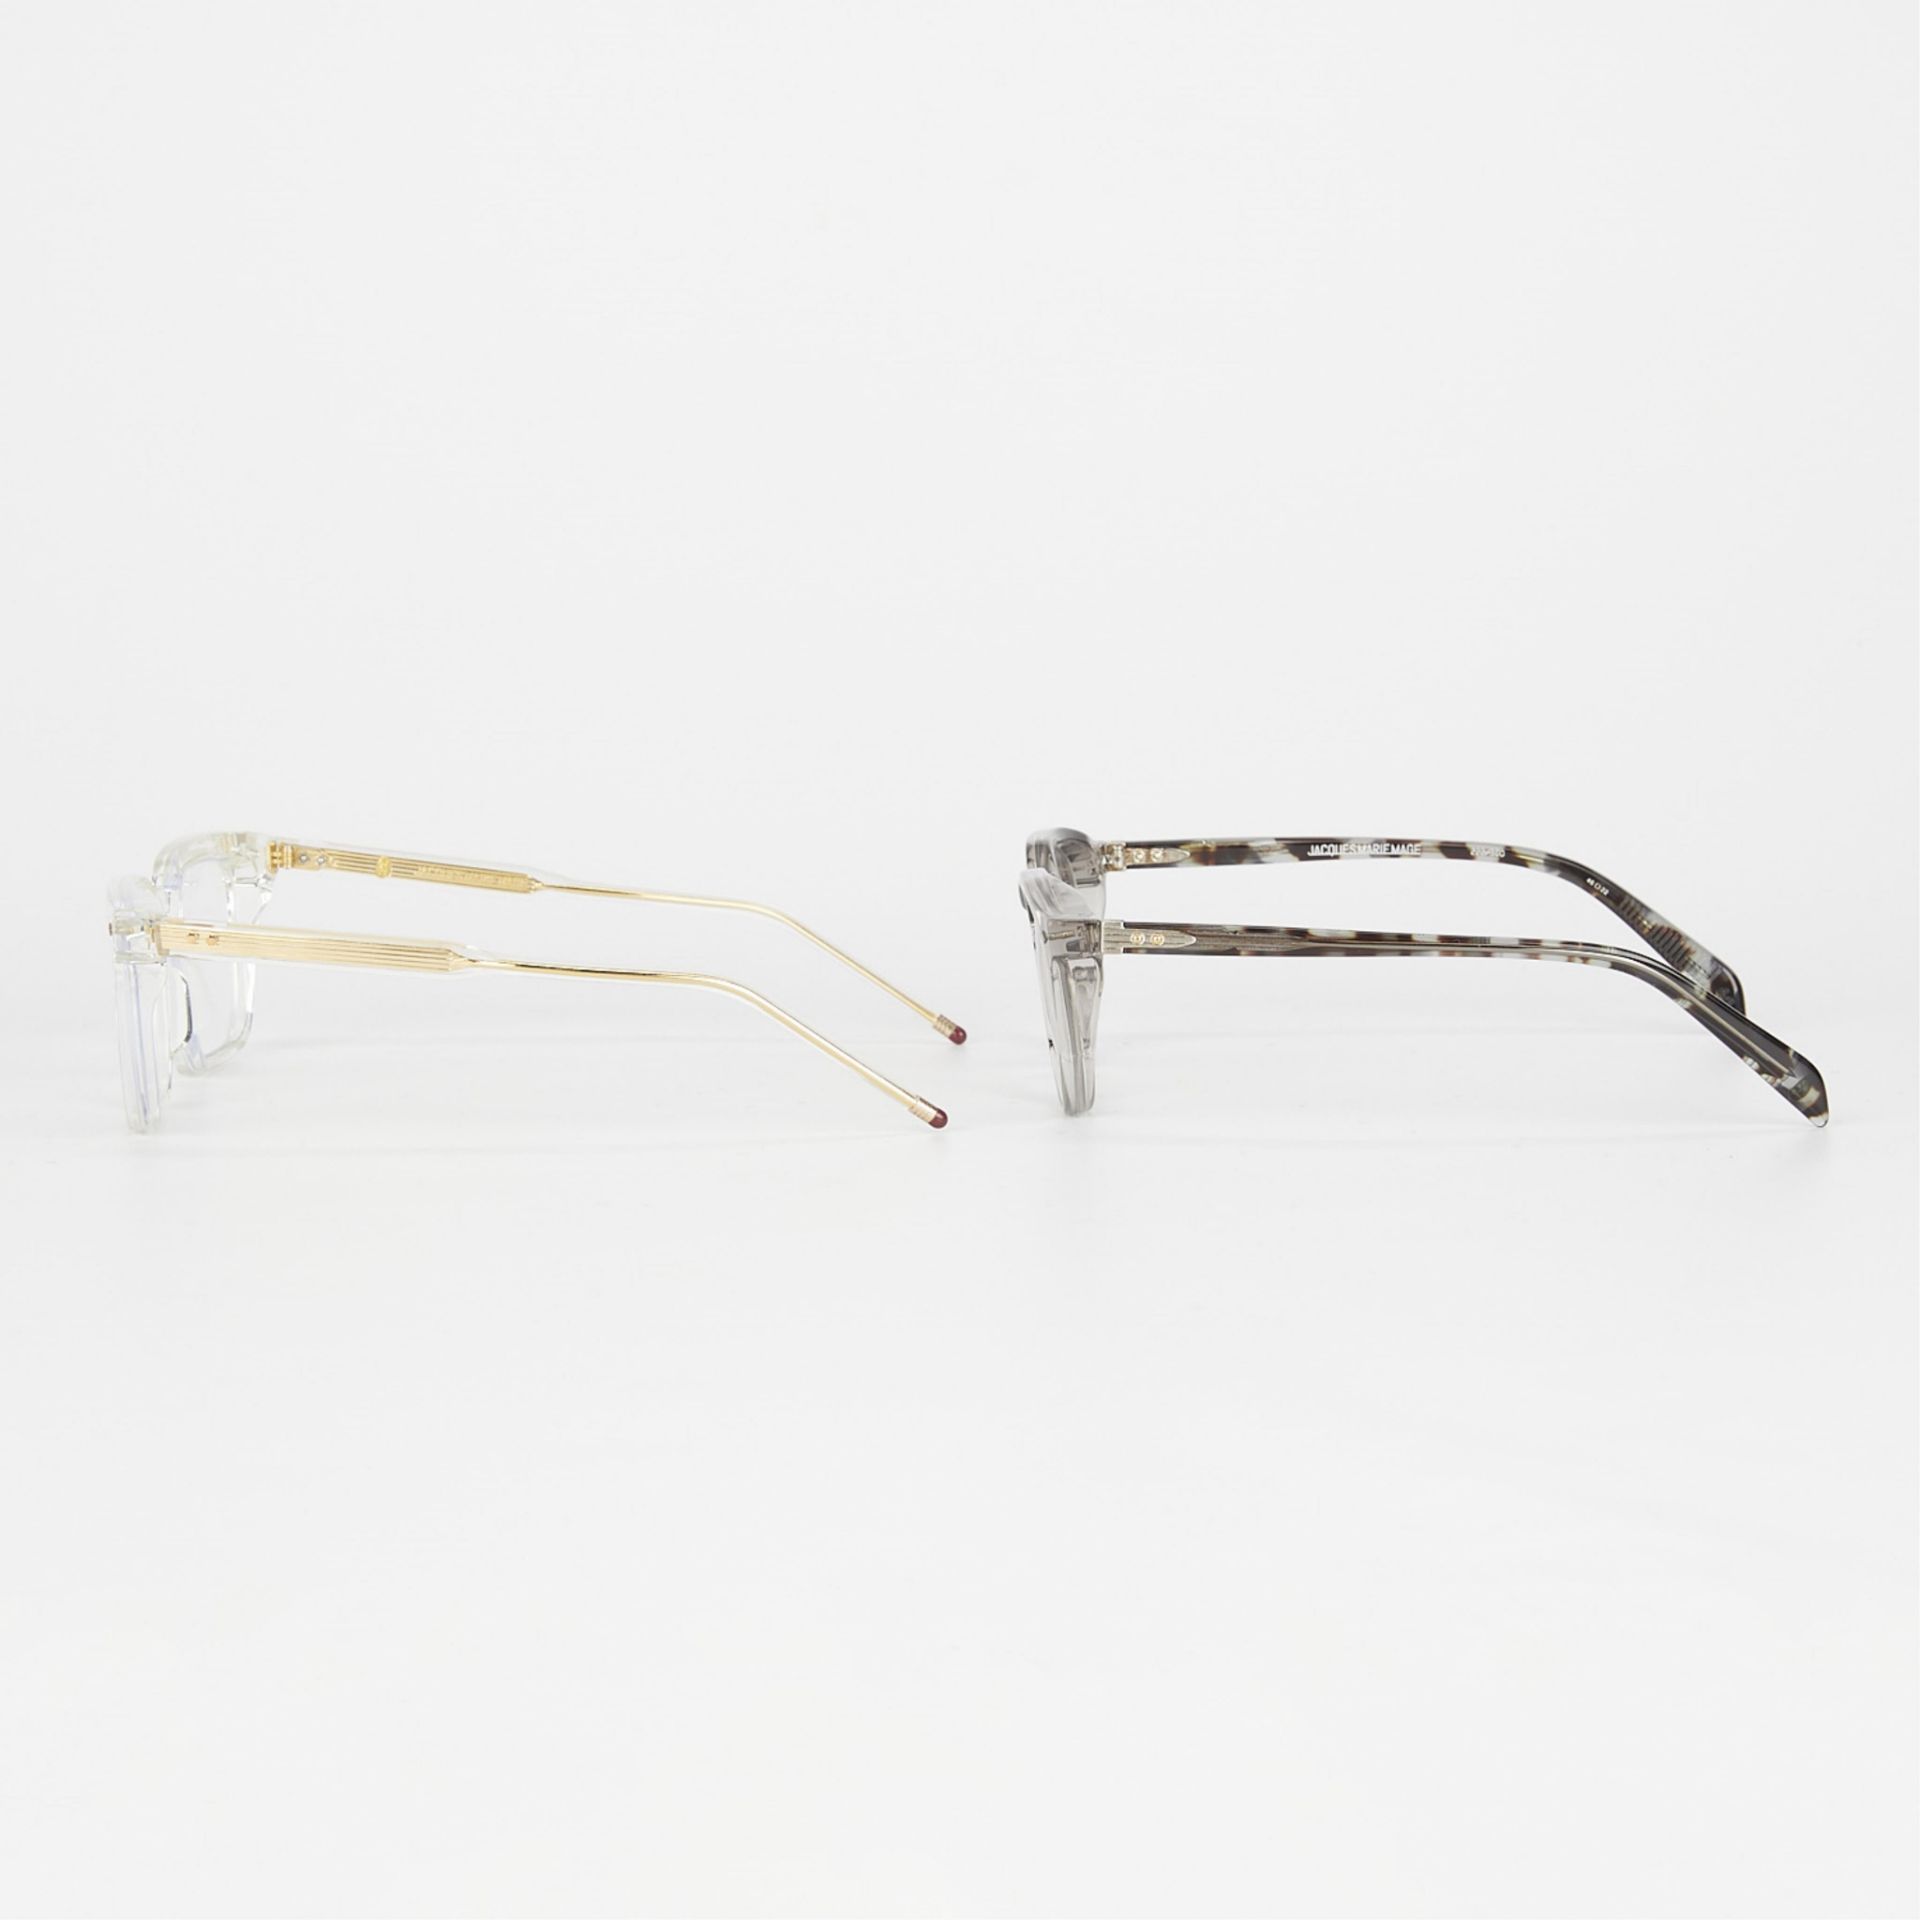 Grp 2 Jacques Marie Mage Eyeglasses - Image 8 of 18